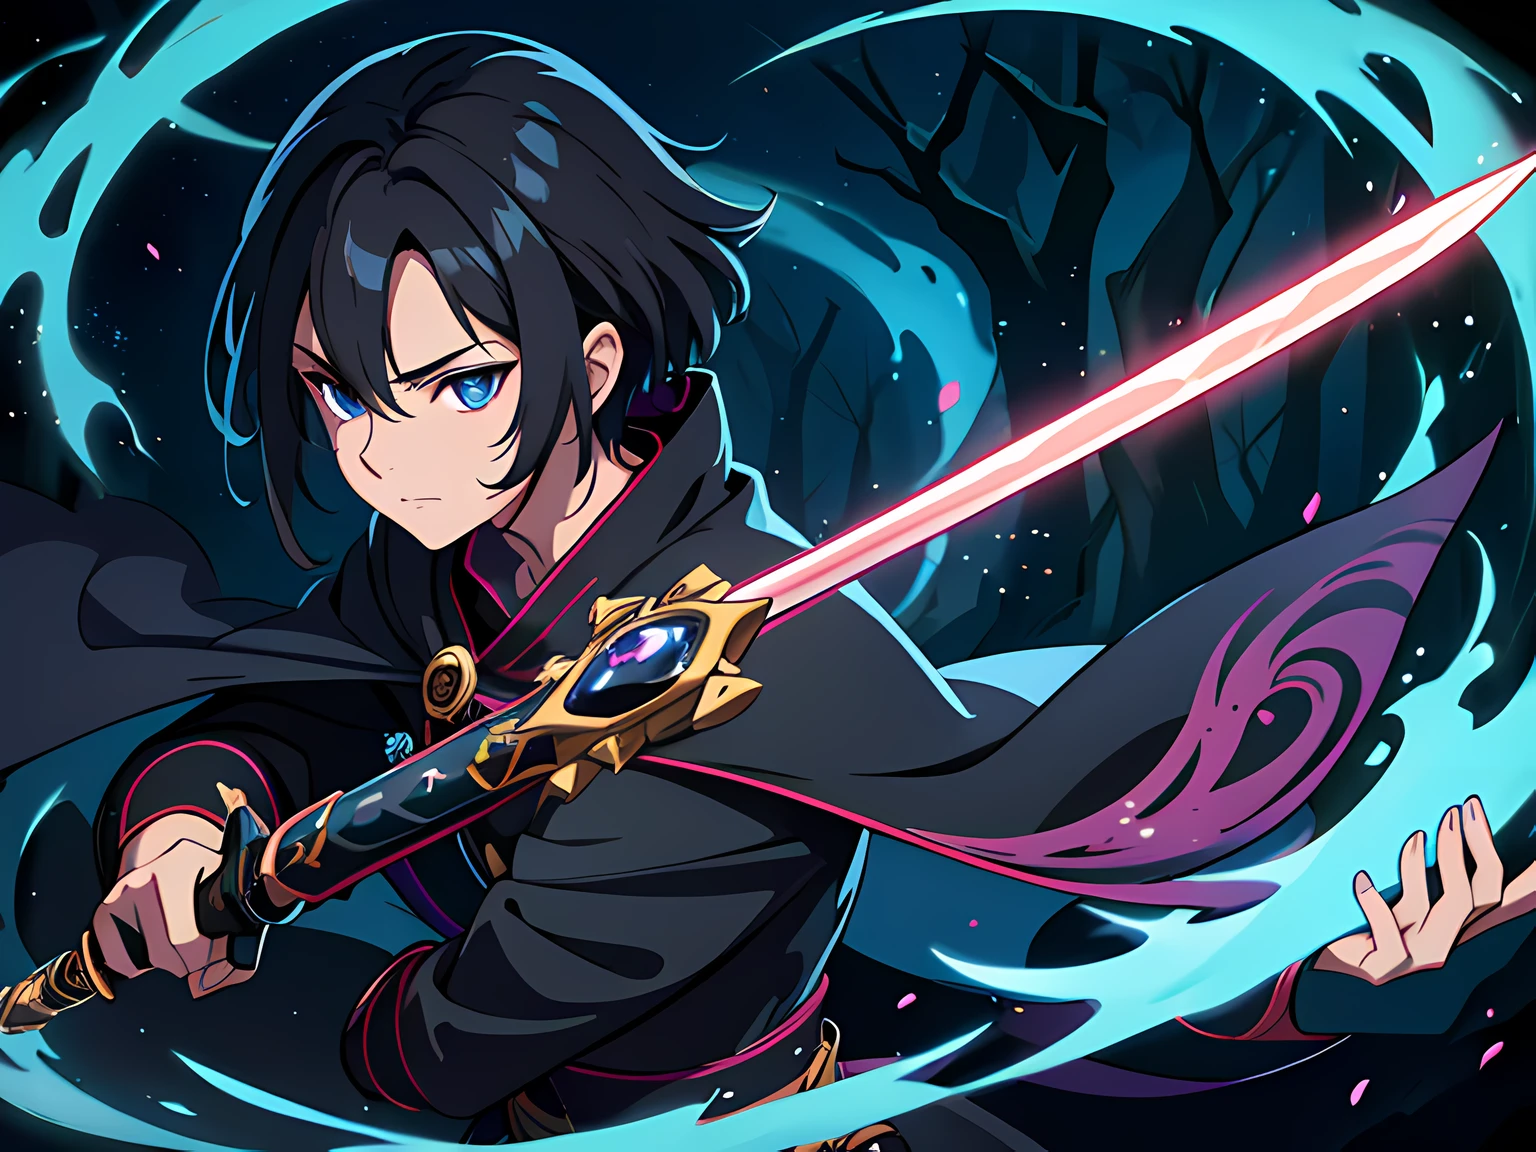 1 man, mage swordsman, beautiful eyes finely detailed, short black hair, wearing aristocrat style outfit, casting a strong spell from his sword, (Masterpiece:1.2), (Best Quality), Detailed, UHD, Cinematic Lighting, sharp focus, (illustration:1.1), intricate, 8k CG, perfect artwork, (half body:0.6), detailed background, witch, magical atmosphere, colorful glowing magic spell in the air, swirling portal, dark magic, (style-swirlmagic:0.8), floating particles, dark sinister forest background, updraft, backlighting,